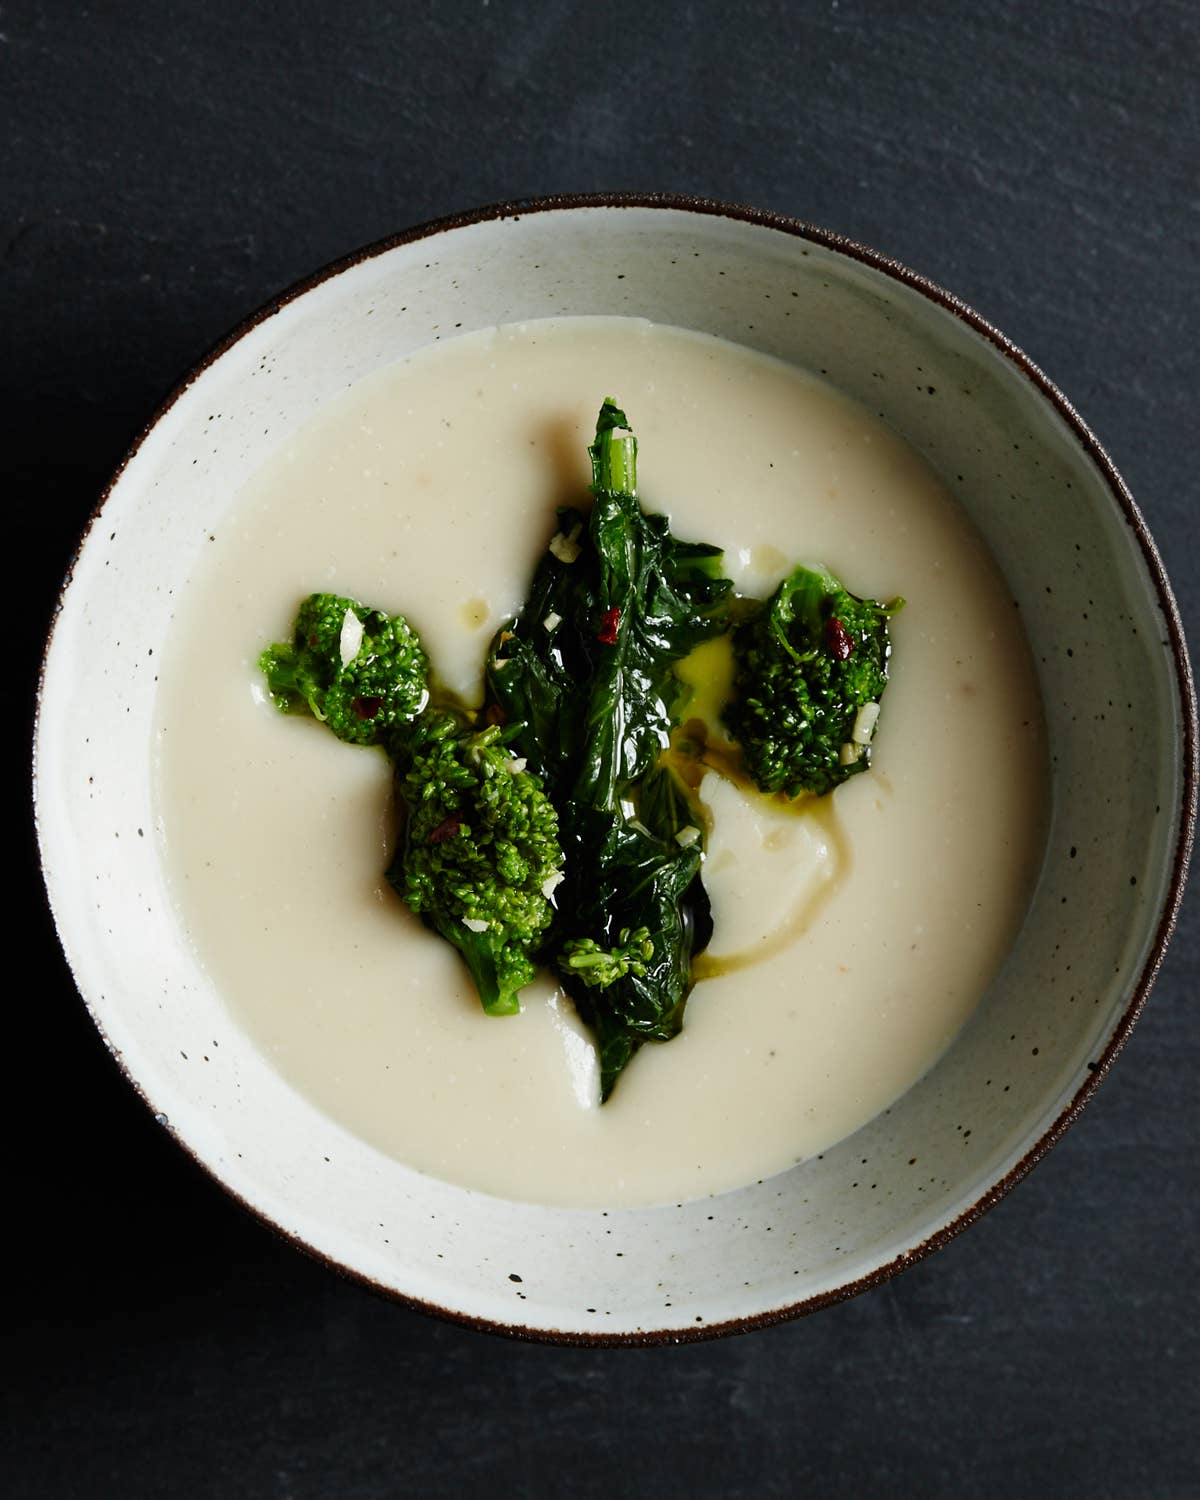 White Bean Soup with Fennel Seeds and Broccoli Rabe